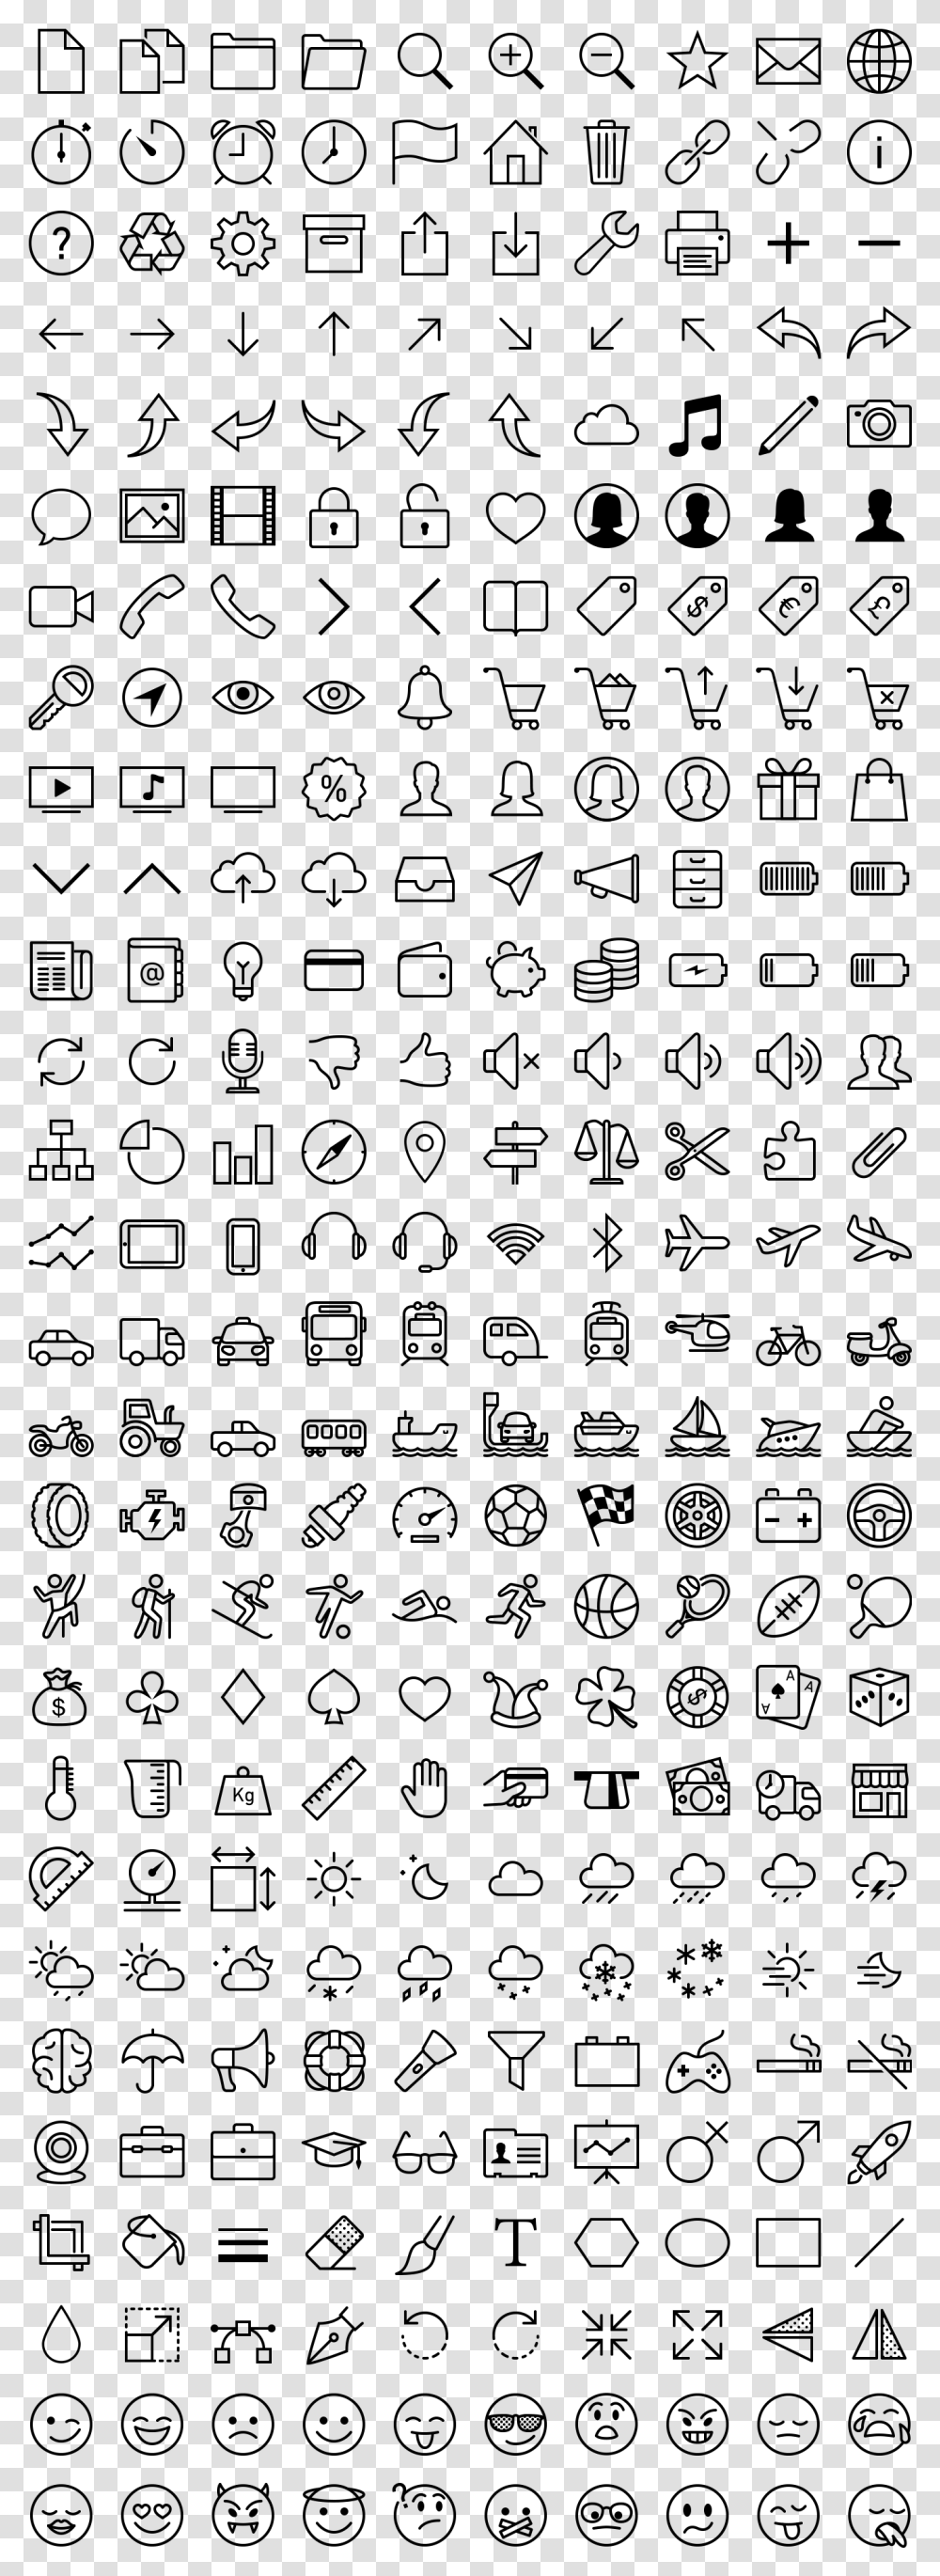 Free Ios Icons Pokemon Gold Silver Shiny, Gray, World Of Warcraft Transparent Png